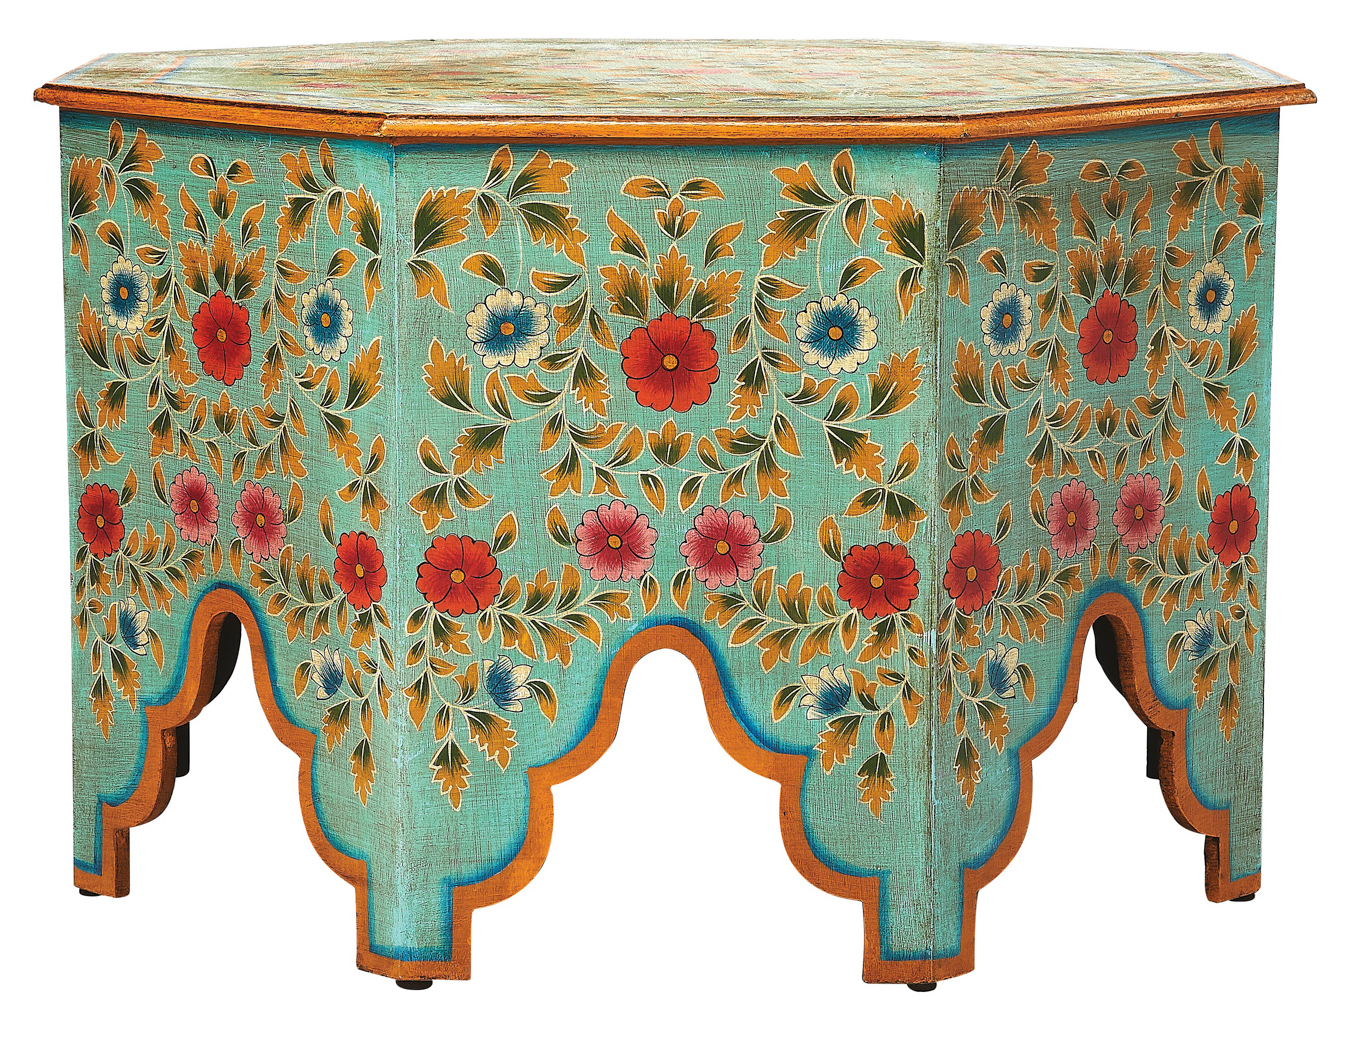 intricate green patterned floral table with scalloped edges suggested by Natasja Sadi